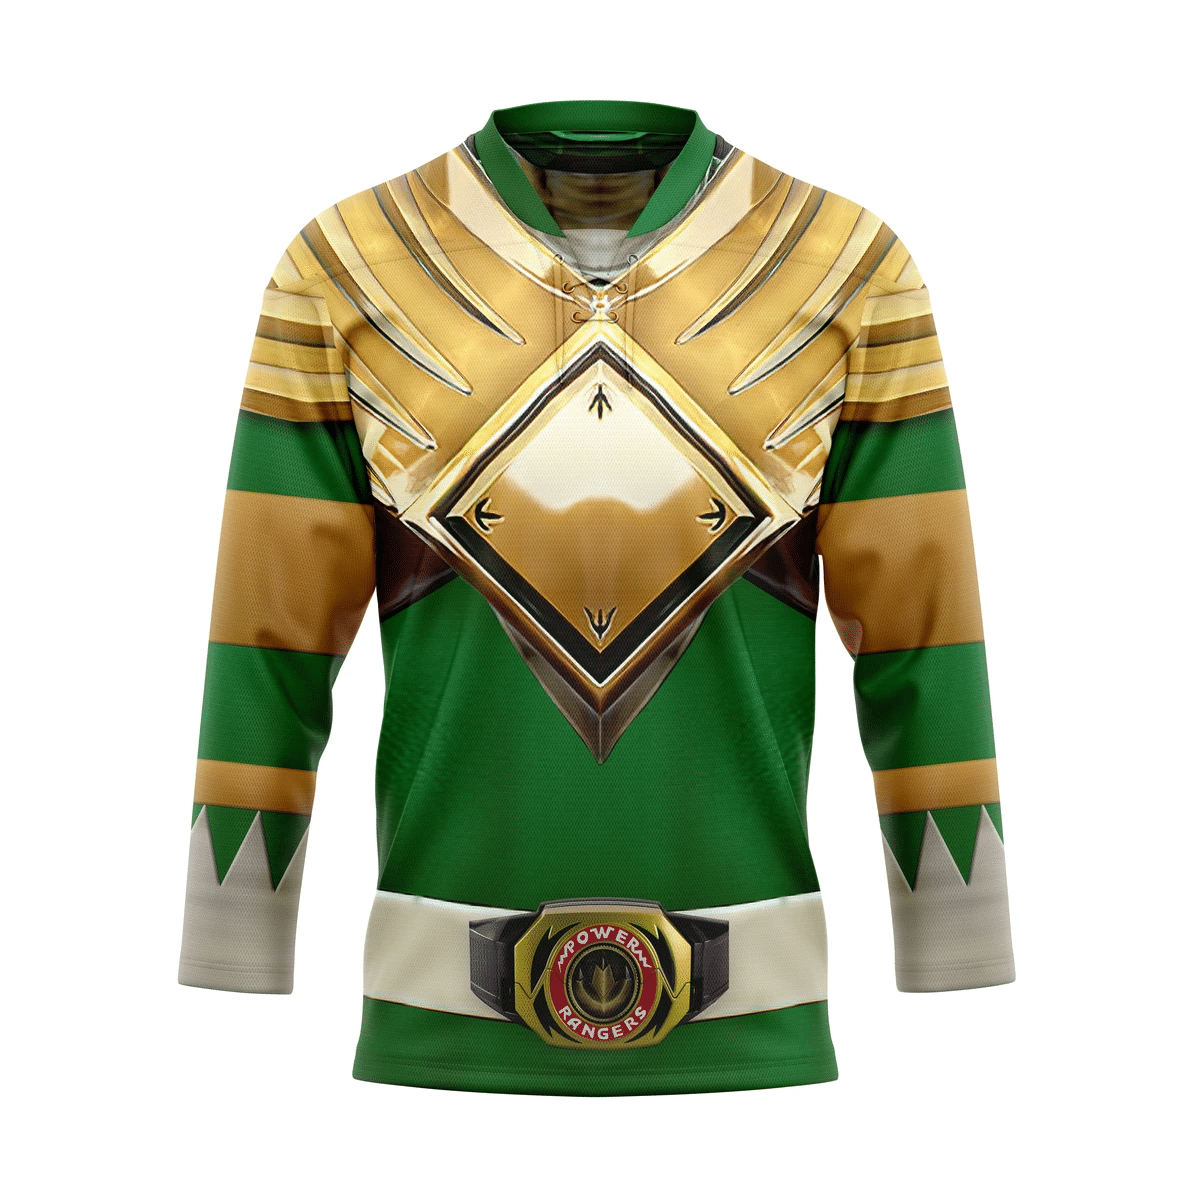 Check out our collection of unique and stylish hockey jerseys from all over the world 142